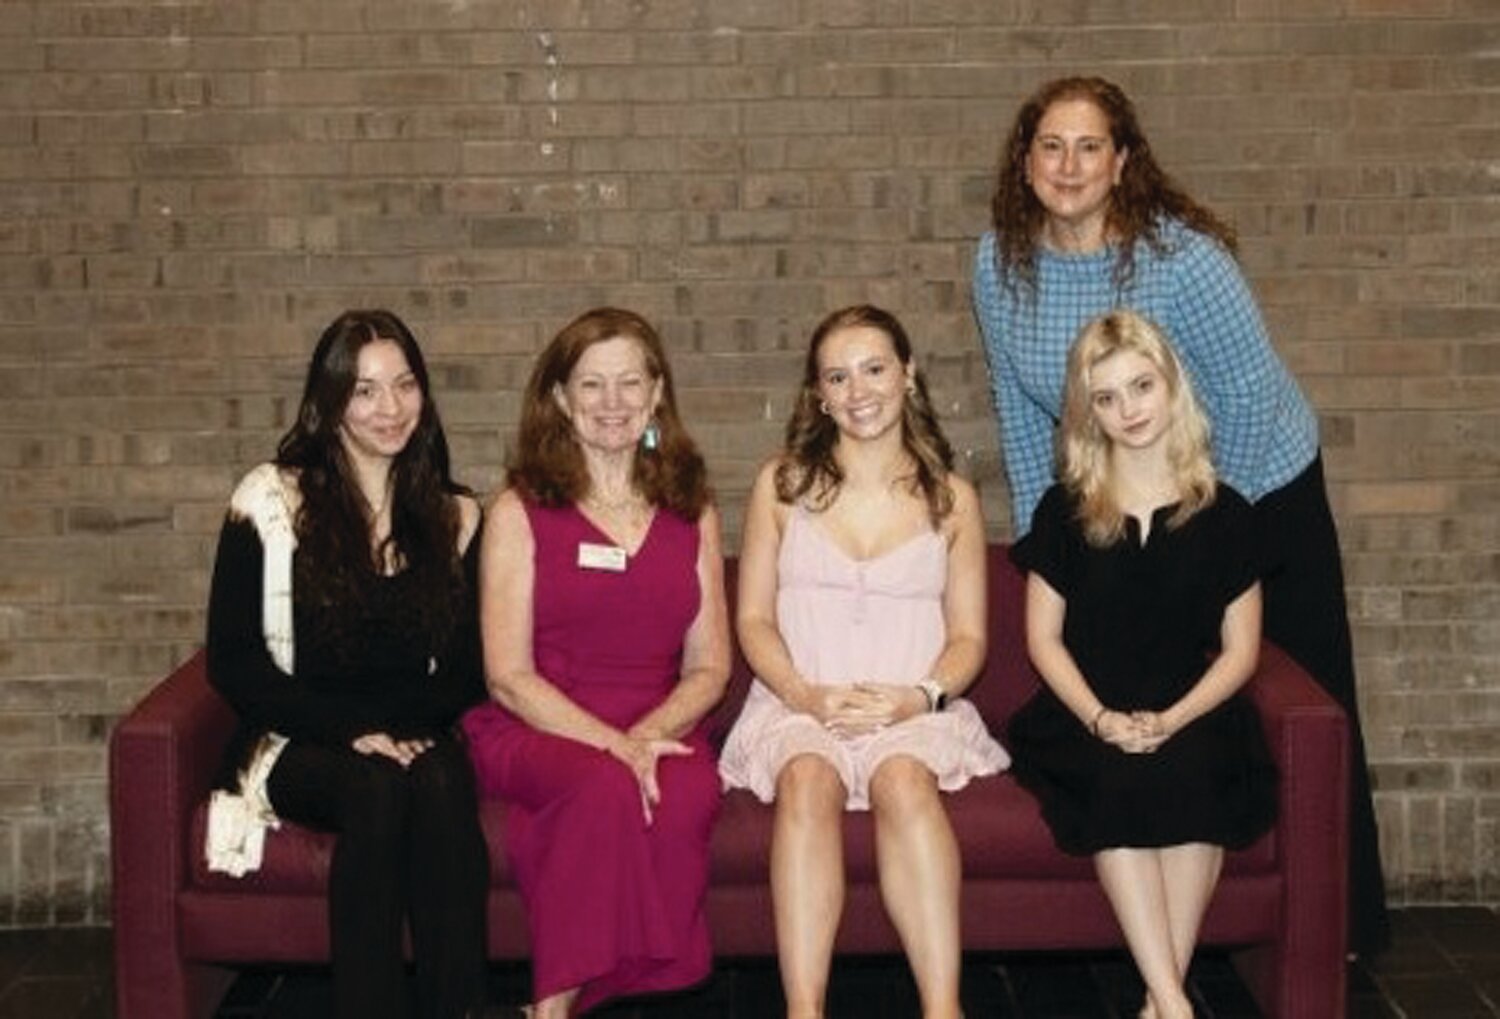 Nancy Larkin-Taylor, Bucks for Kids, second from left, sits with MBIT students, from left, Jade Perez, Abigail Rickards and Makayla Bock. Standing is Philanthropy Club coordinator Pam Swoyer, of MBIT.